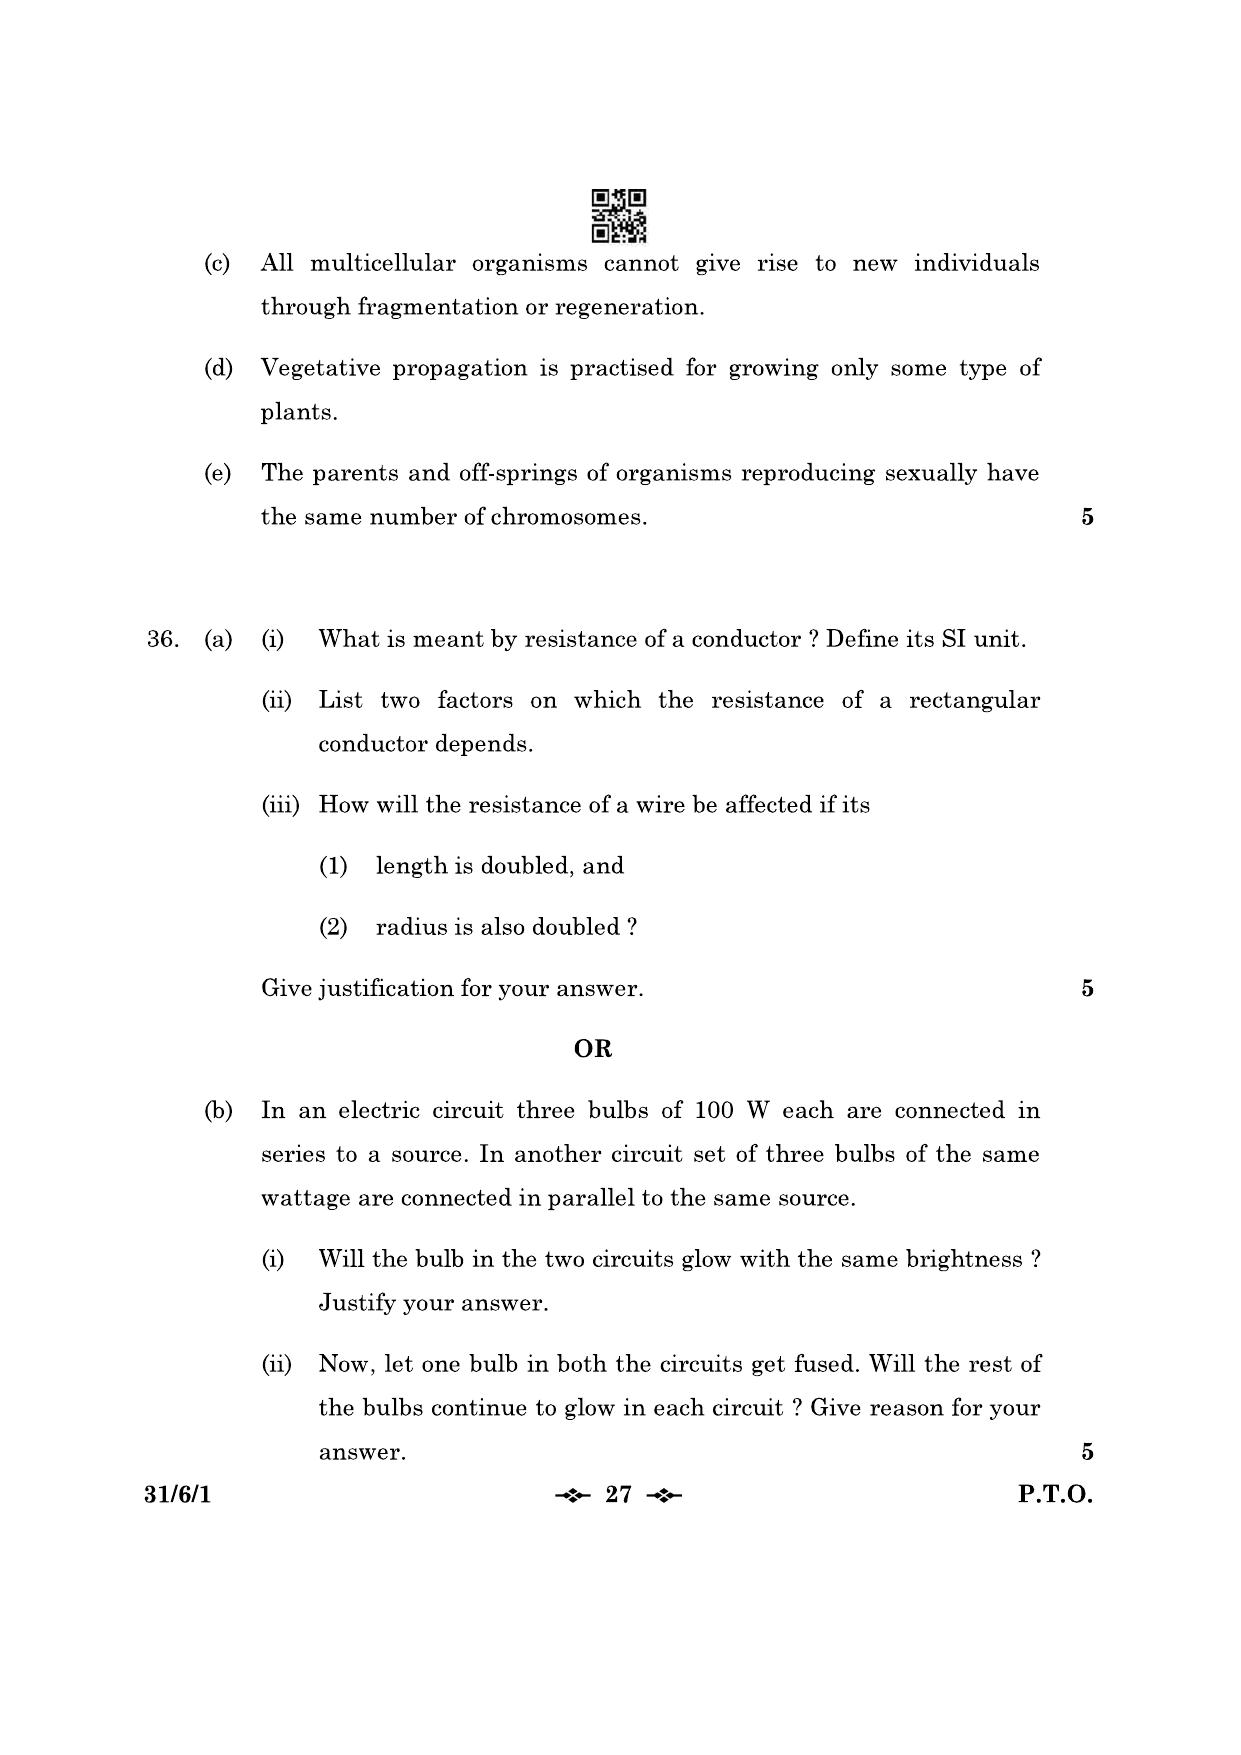 CBSE Class 10 31-6-1 Science 2023 Question Paper - Page 27